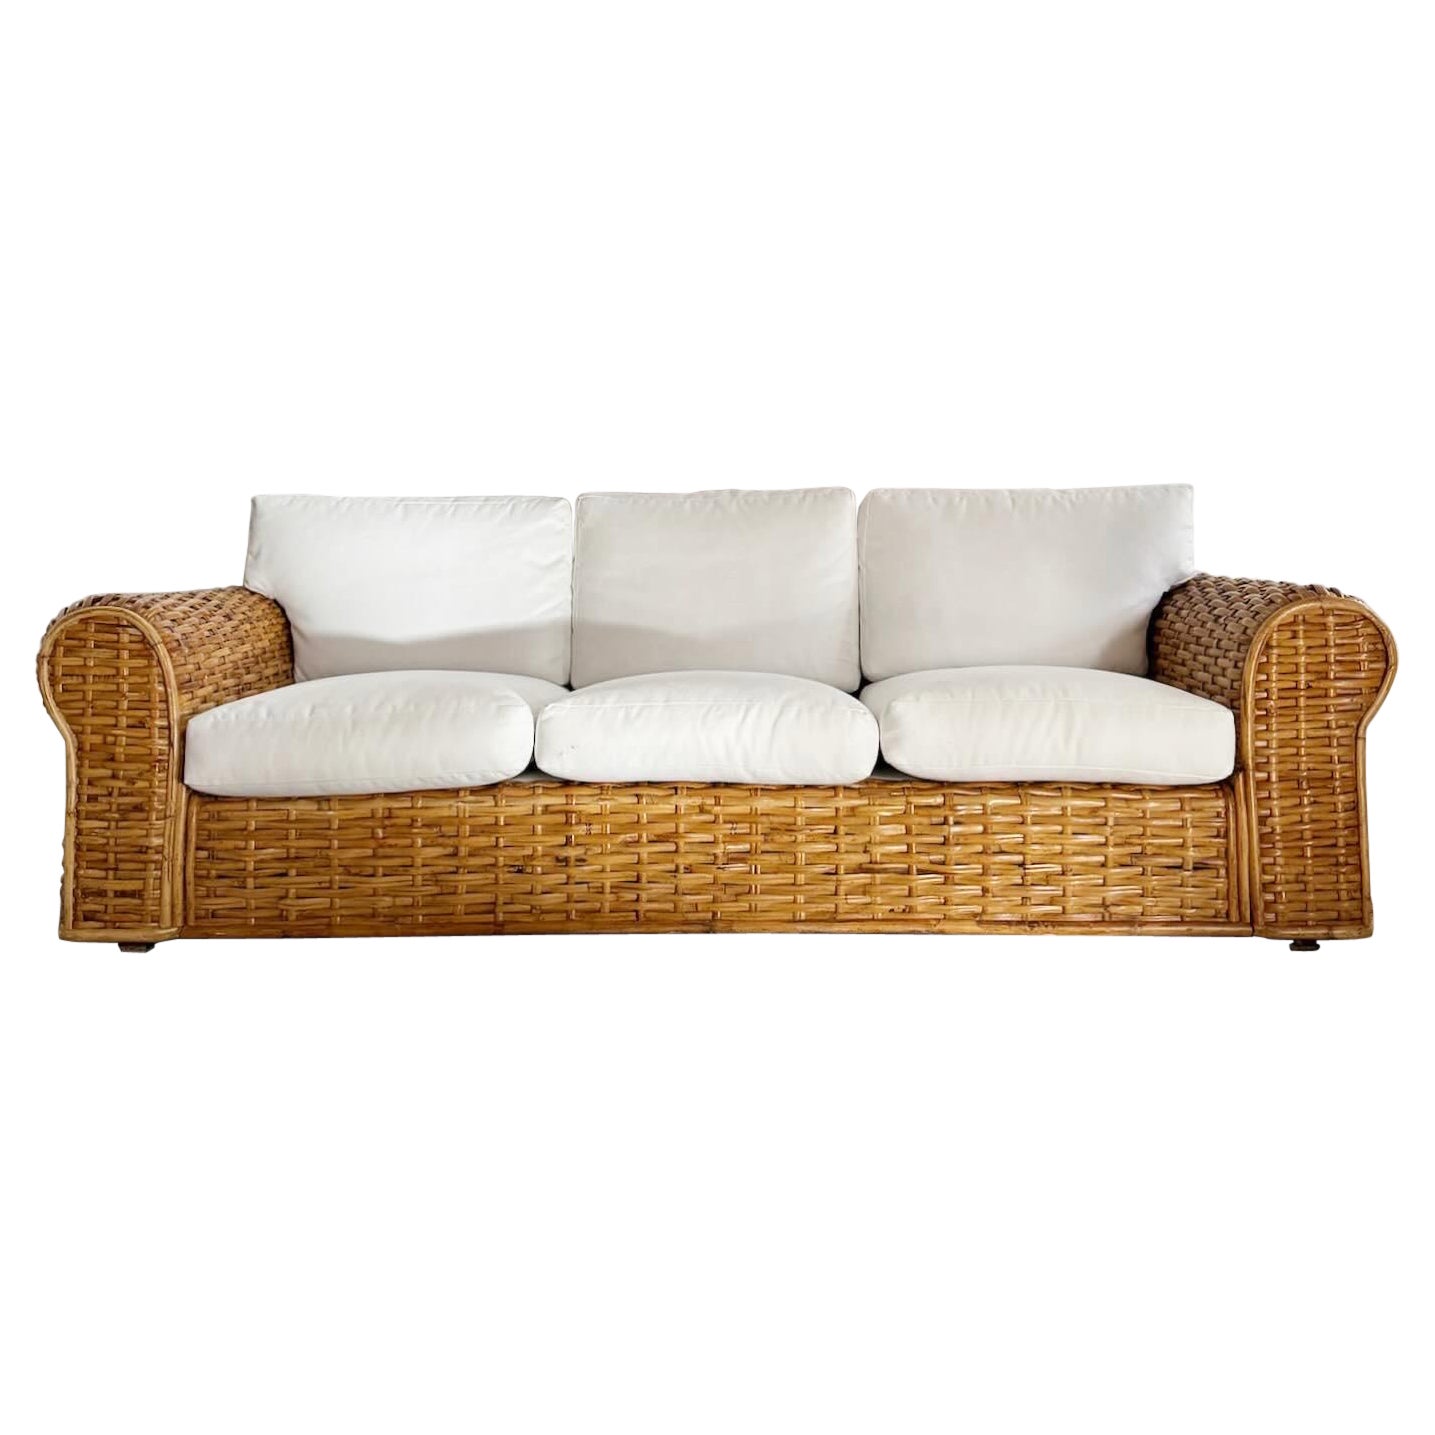 Boho Chic Wicker Sofa With White Cushions by Polo Ralph Lauren